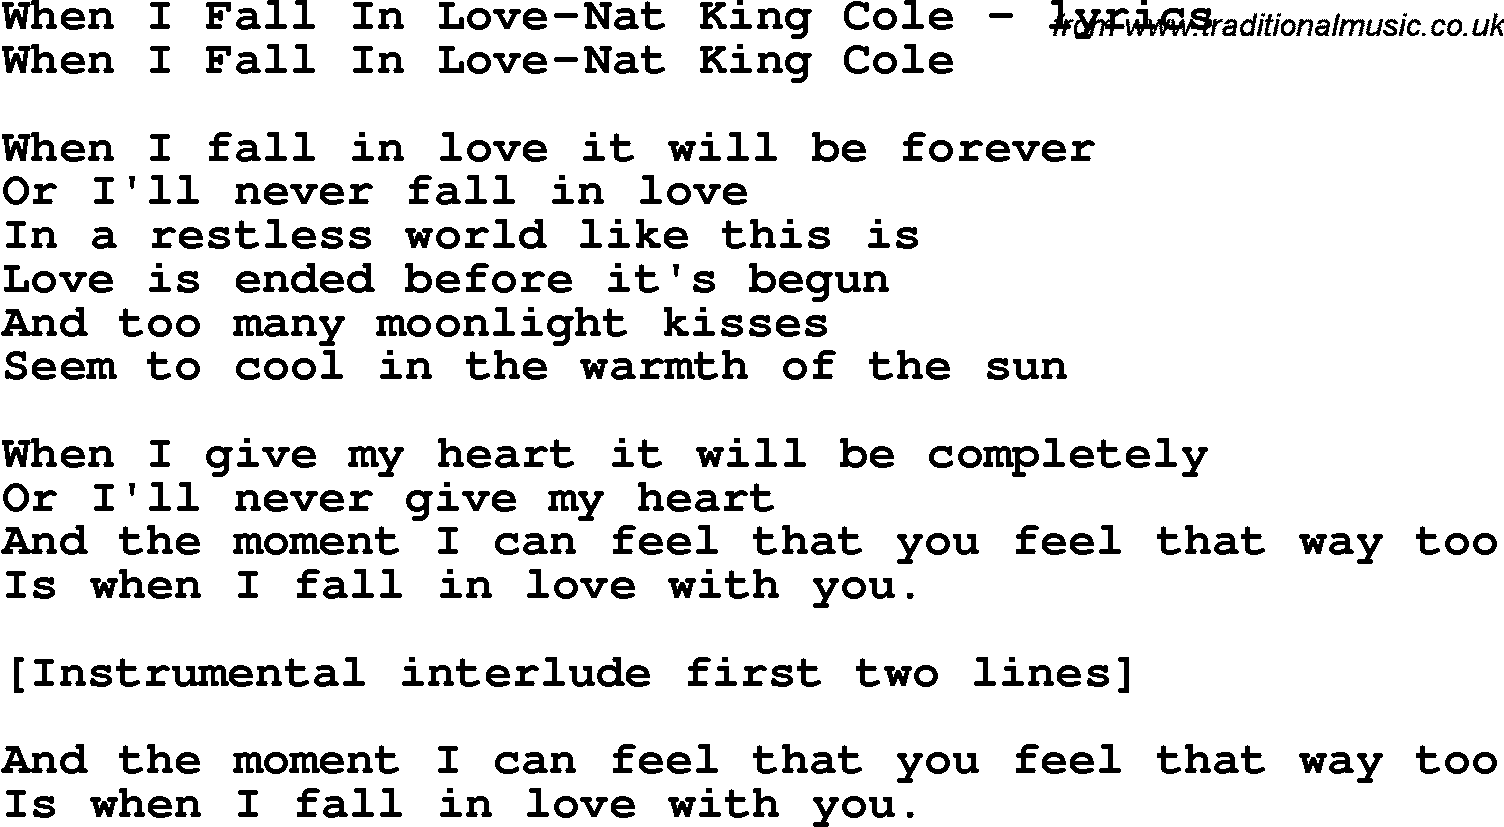 Love Song Lyrics for: When I Fall In Love-Nat King Cole